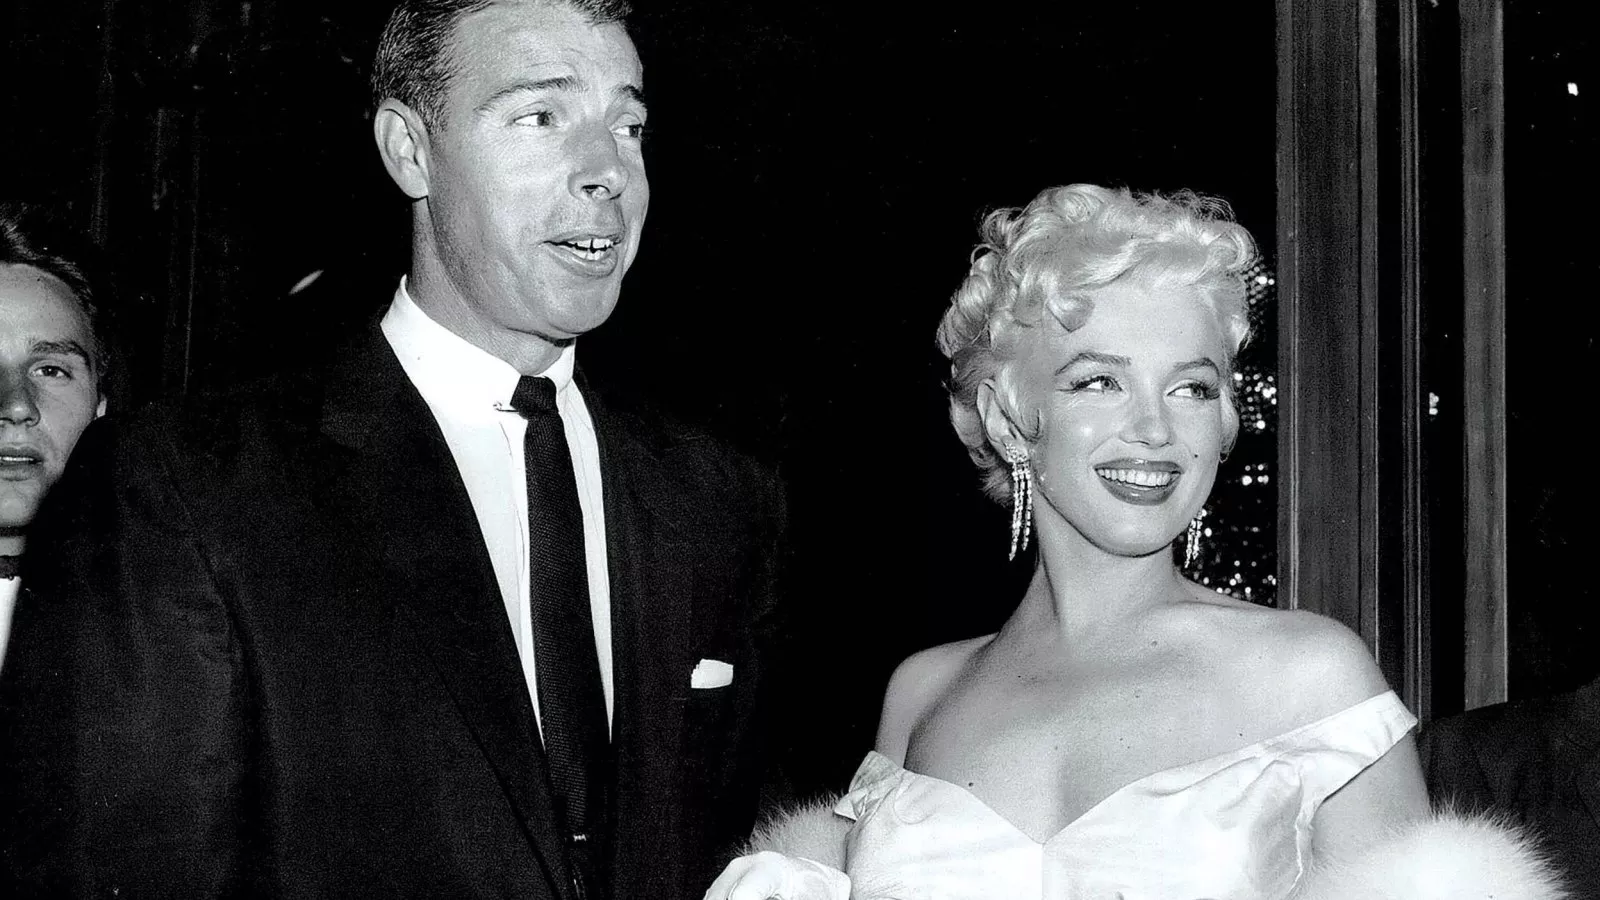 The Story Behind the Only Photo of JFK and Marilyn Monroe